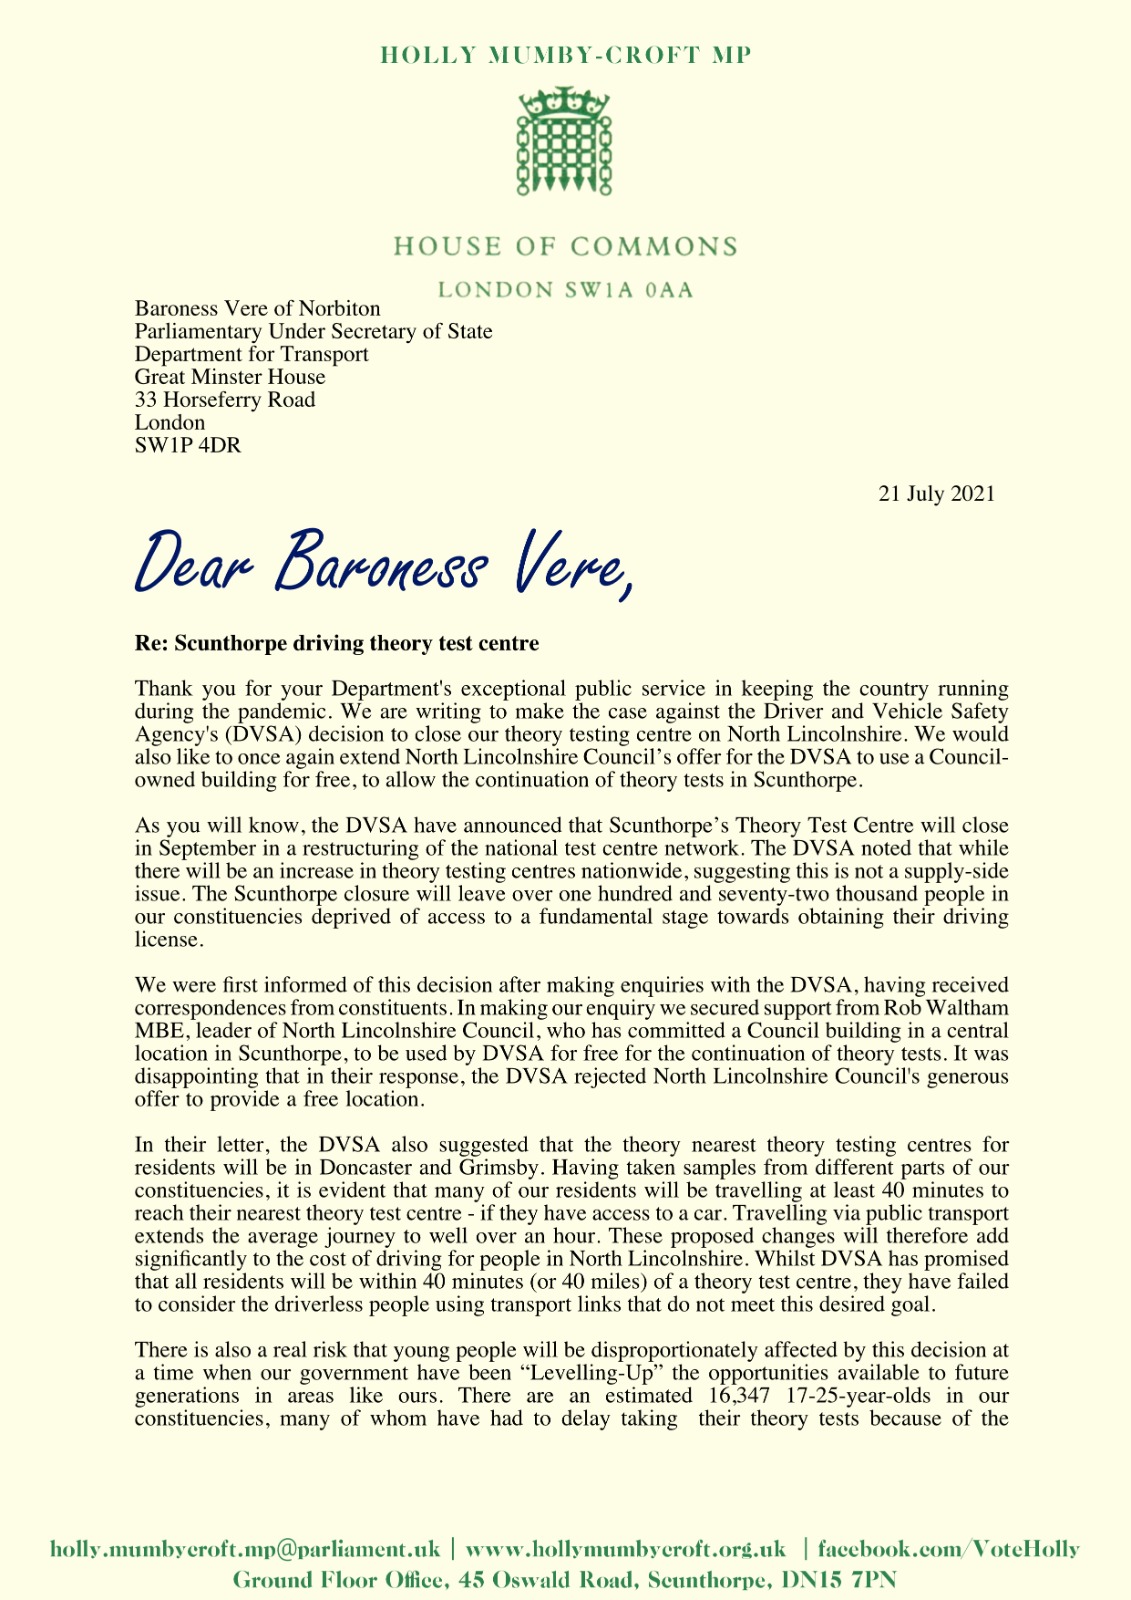 Letter to Baroness Vere